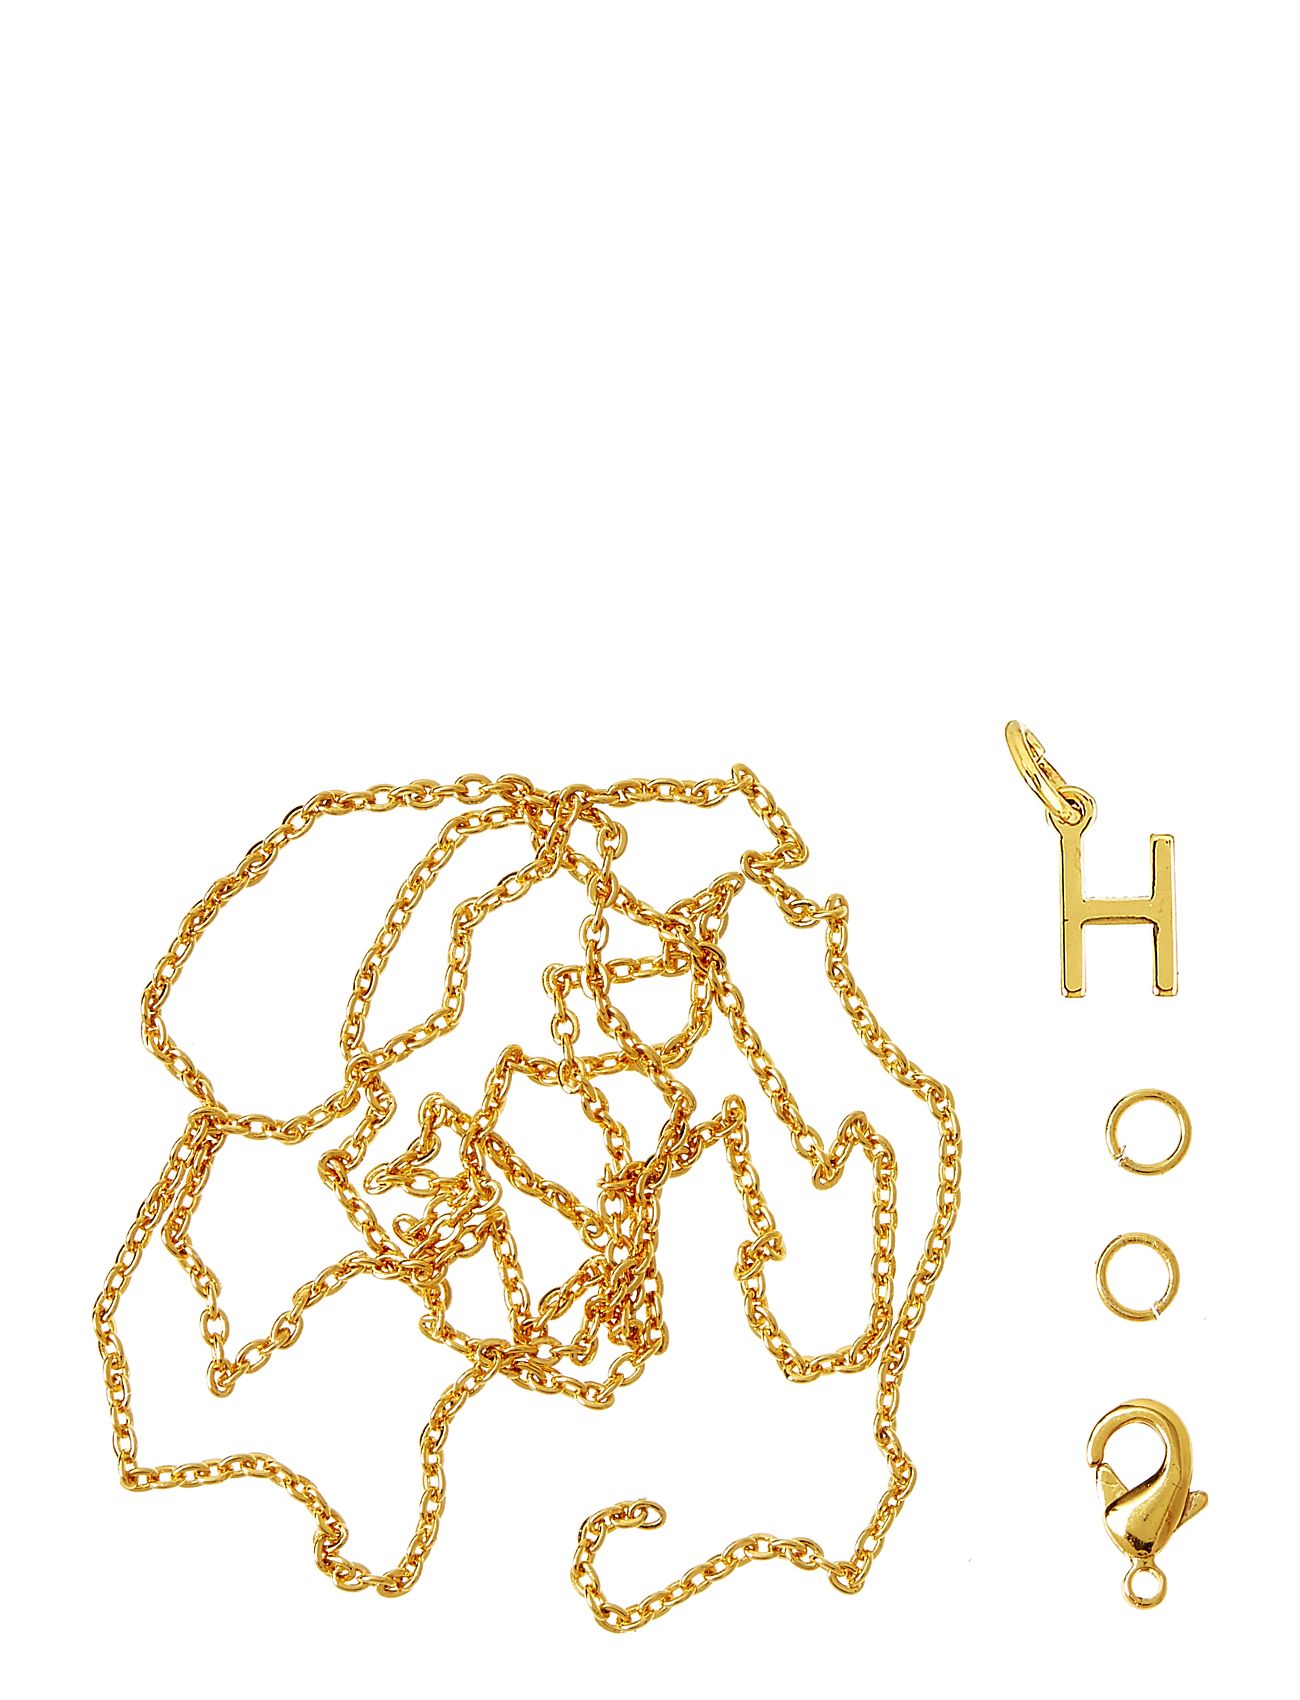 Letter H Gp With O-Ring, Chain And Clasp Toys Creativity Drawing & Crafts Craft Jewellery & Accessories Gold Me & My Box